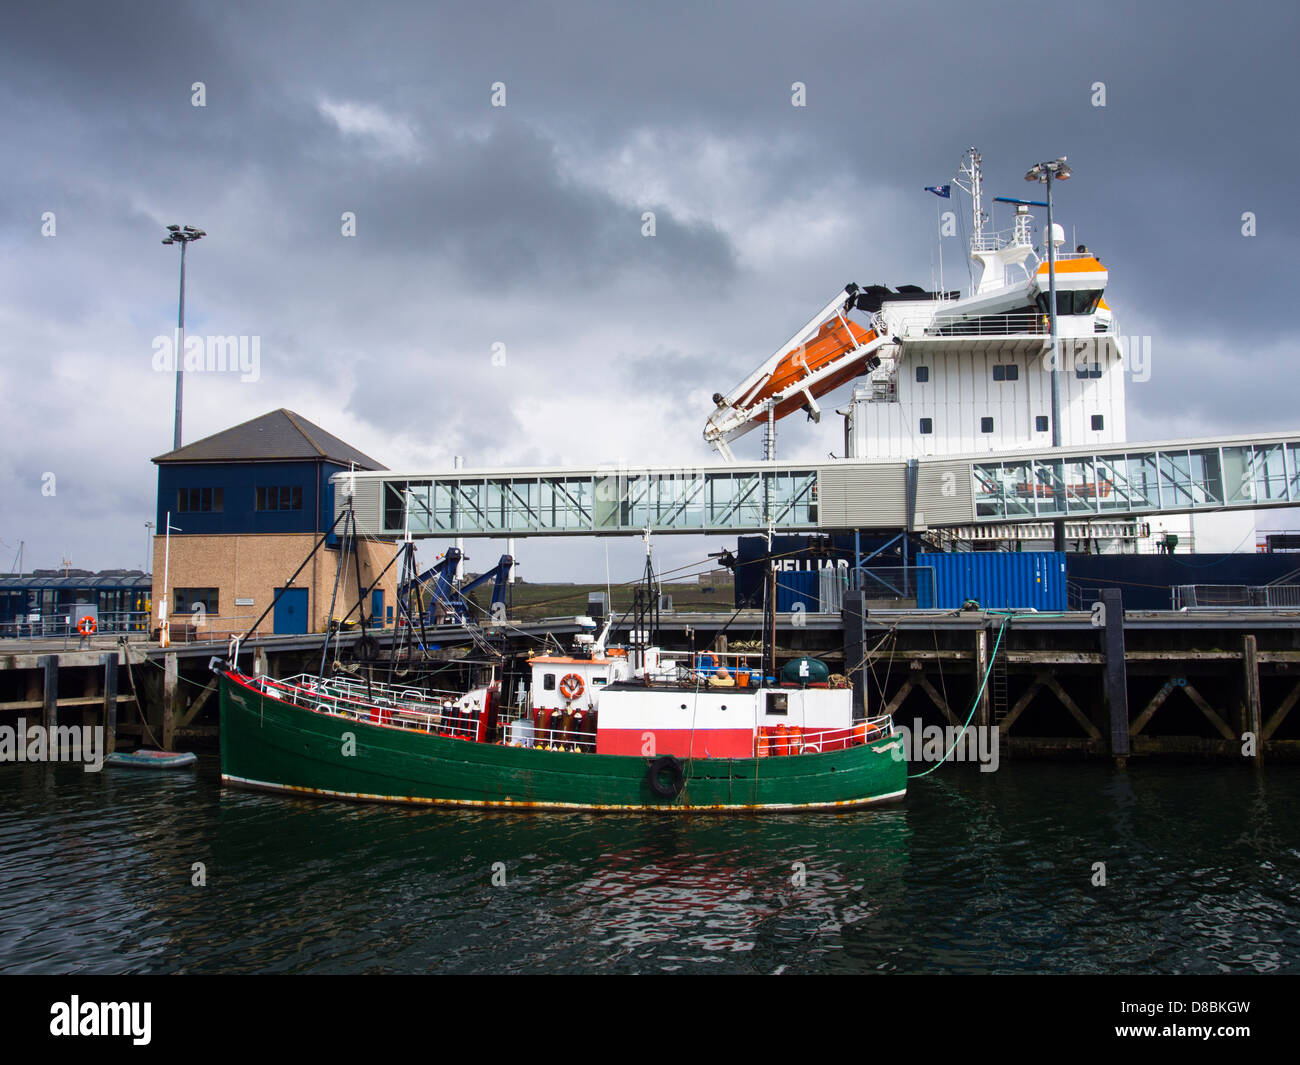 Scotland, Orkney Islands, Mainland Orkney. A variety of sea boats moored in Stromness Harbour on mainland Orkney. Stock Photo